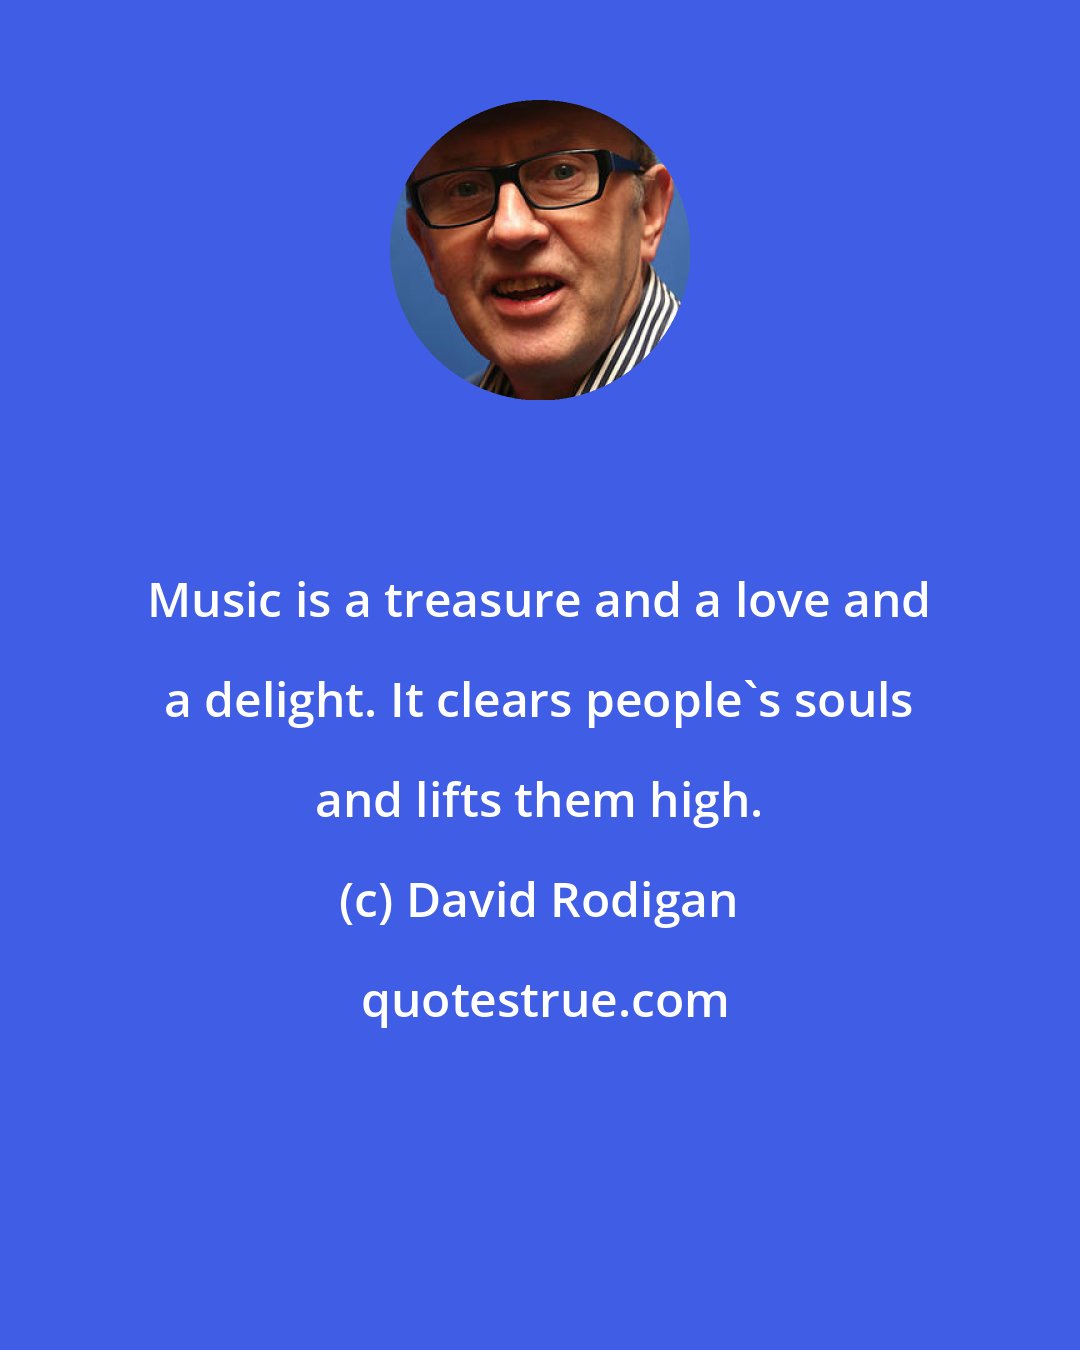 David Rodigan: Music is a treasure and a love and a delight. It clears people's souls and lifts them high.